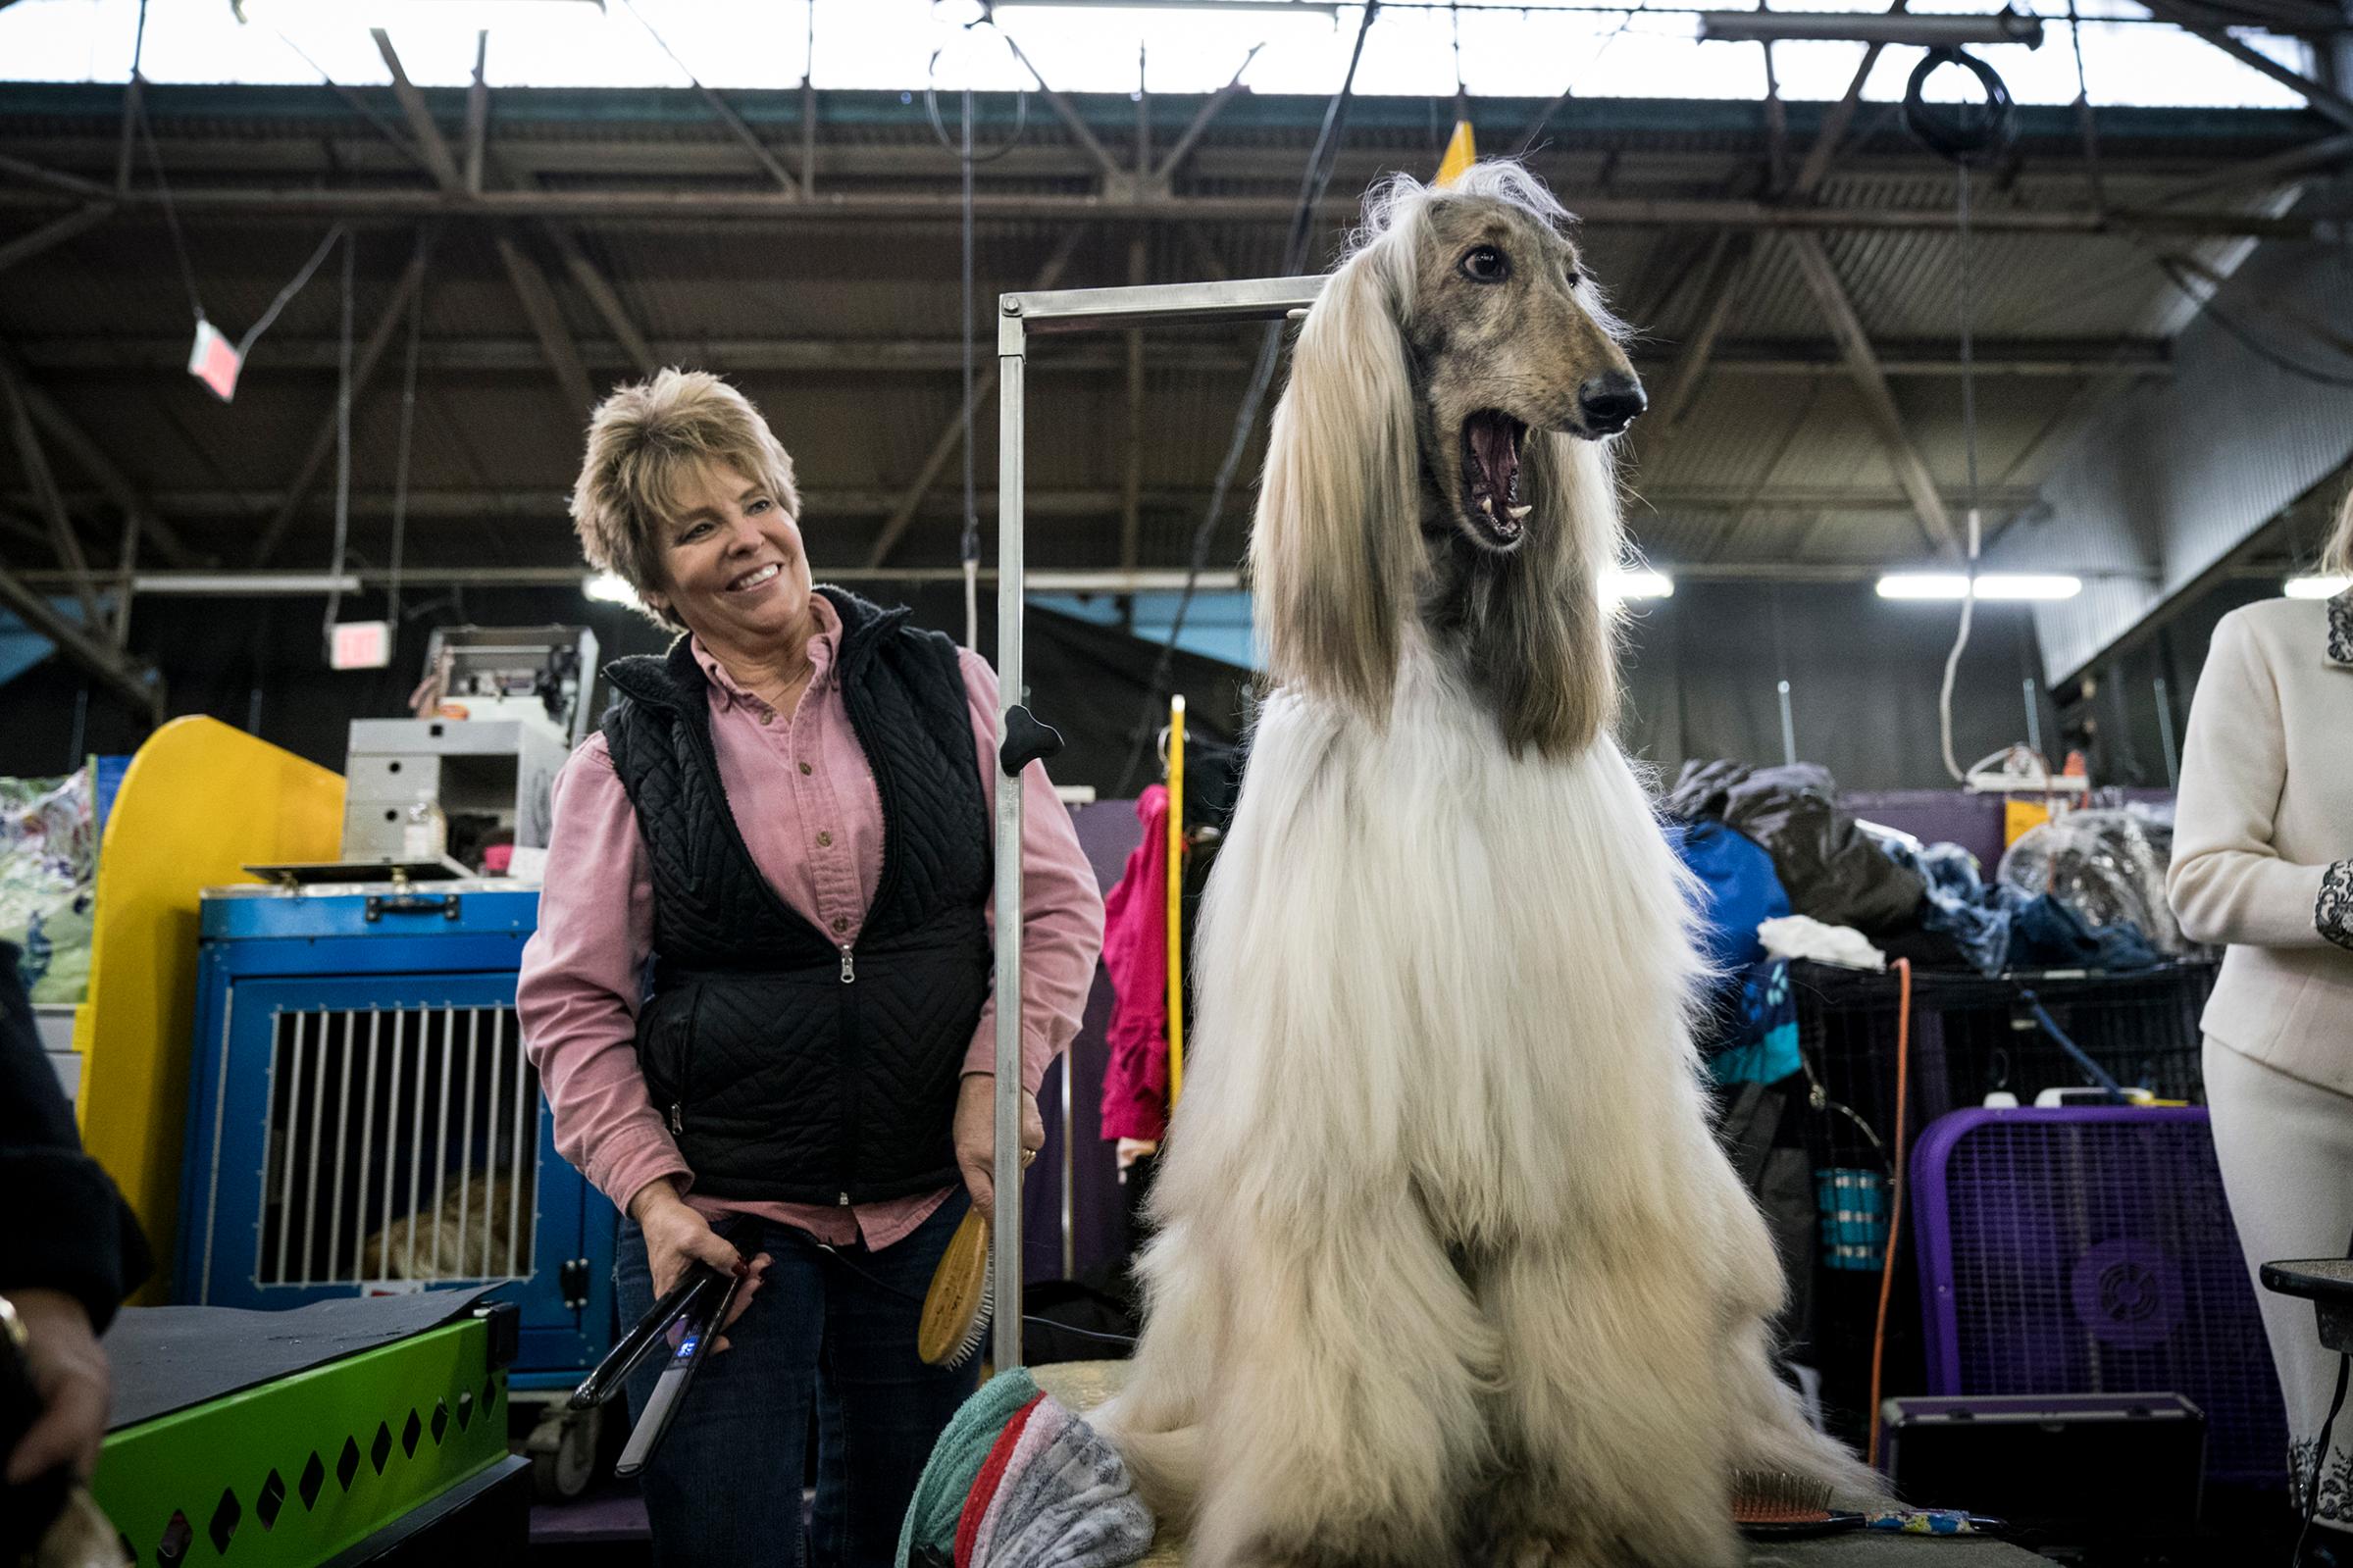 Divin the Afghan Hound yawns while sitting backstage in the grooming area at the 142nd Westminster Kennel Club Dog Show at The Piers in New York on Feb. 12, 2018.